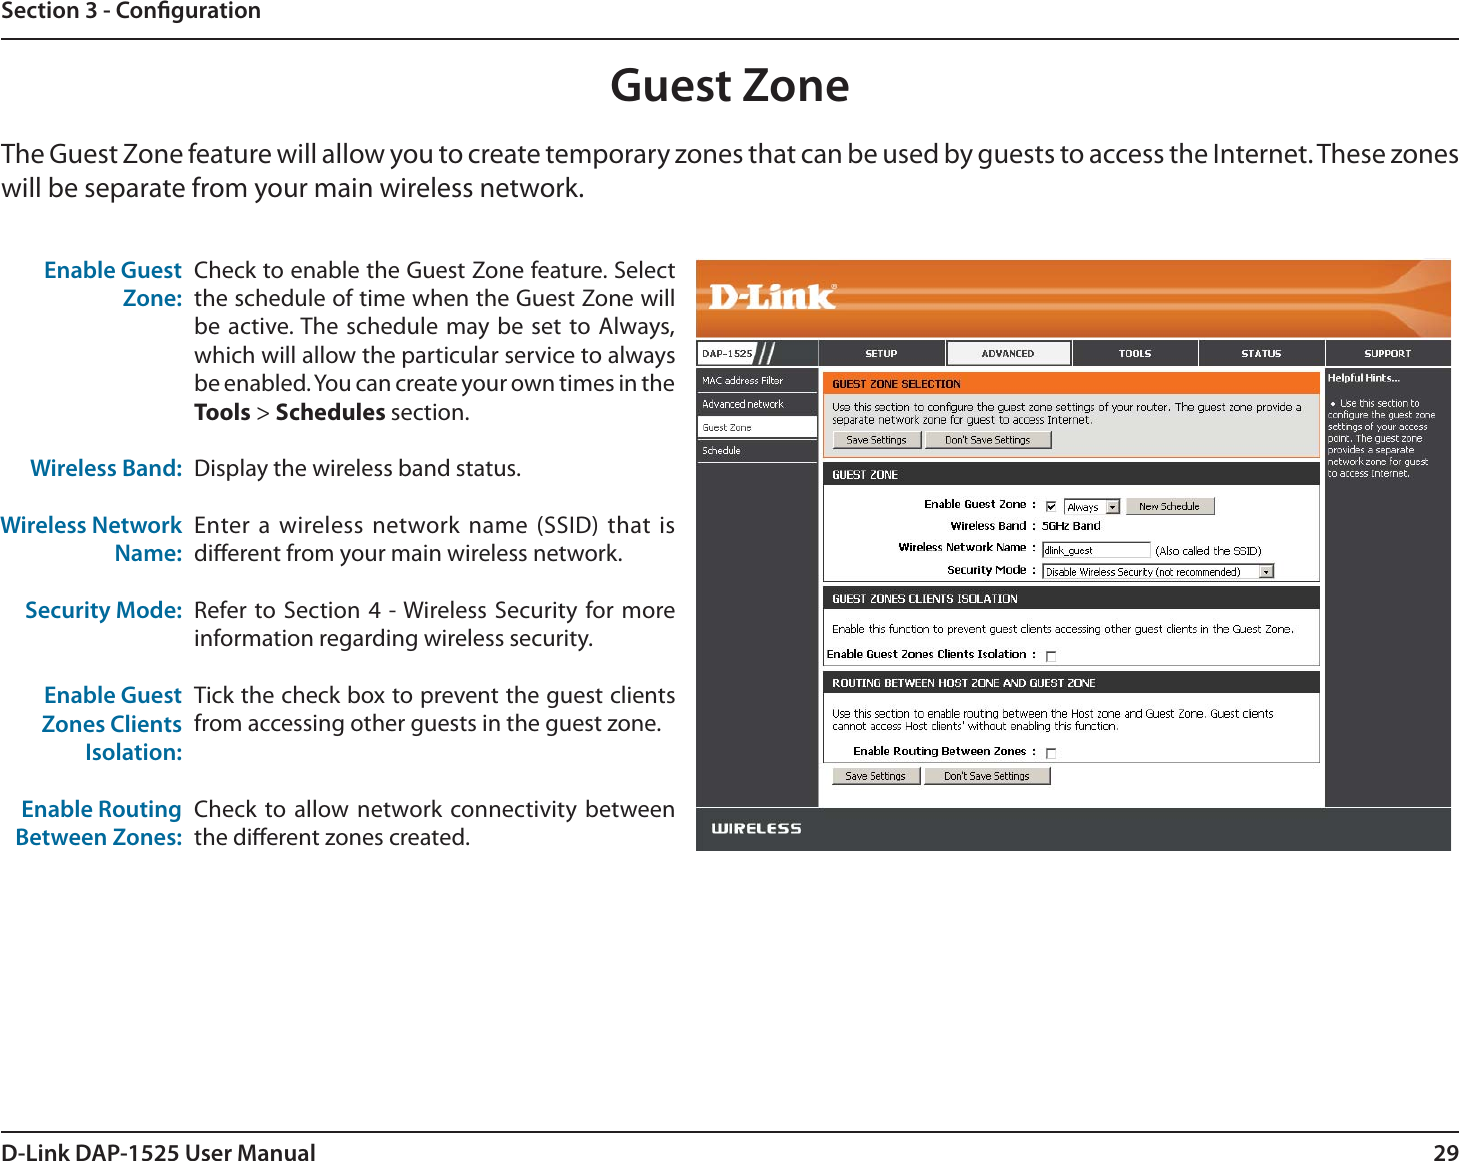 29D-Link DAP-1525 User ManualSection 3 - CongurationGuest ZoneEnable Guest Zone:Wireless Band:Wireless Network Name:Security Mode:Enable GuestZones ClientsIsolation:Enable Routing Between Zones:Check to enable the Guest Zone feature. Select the schedule of time when the Guest Zone will be active. The schedule may be set to Always, which will allow the particular service to always be enabled. You can create your own times in the Tools &gt; Schedules section.Display the wireless band status.Enter a wireless network name (SSID) that is dierent from your main wireless network.Refer to Section 4 - Wireless Security for more information regarding wireless security.Tick the check box to prevent the guest clients from accessing other guests in the guest zone.Check to allow network connectivity between the dierent zones created. The Guest Zone feature will allow you to create temporary zones that can be used by guests to access the Internet. These zones will be separate from your main wireless network. 